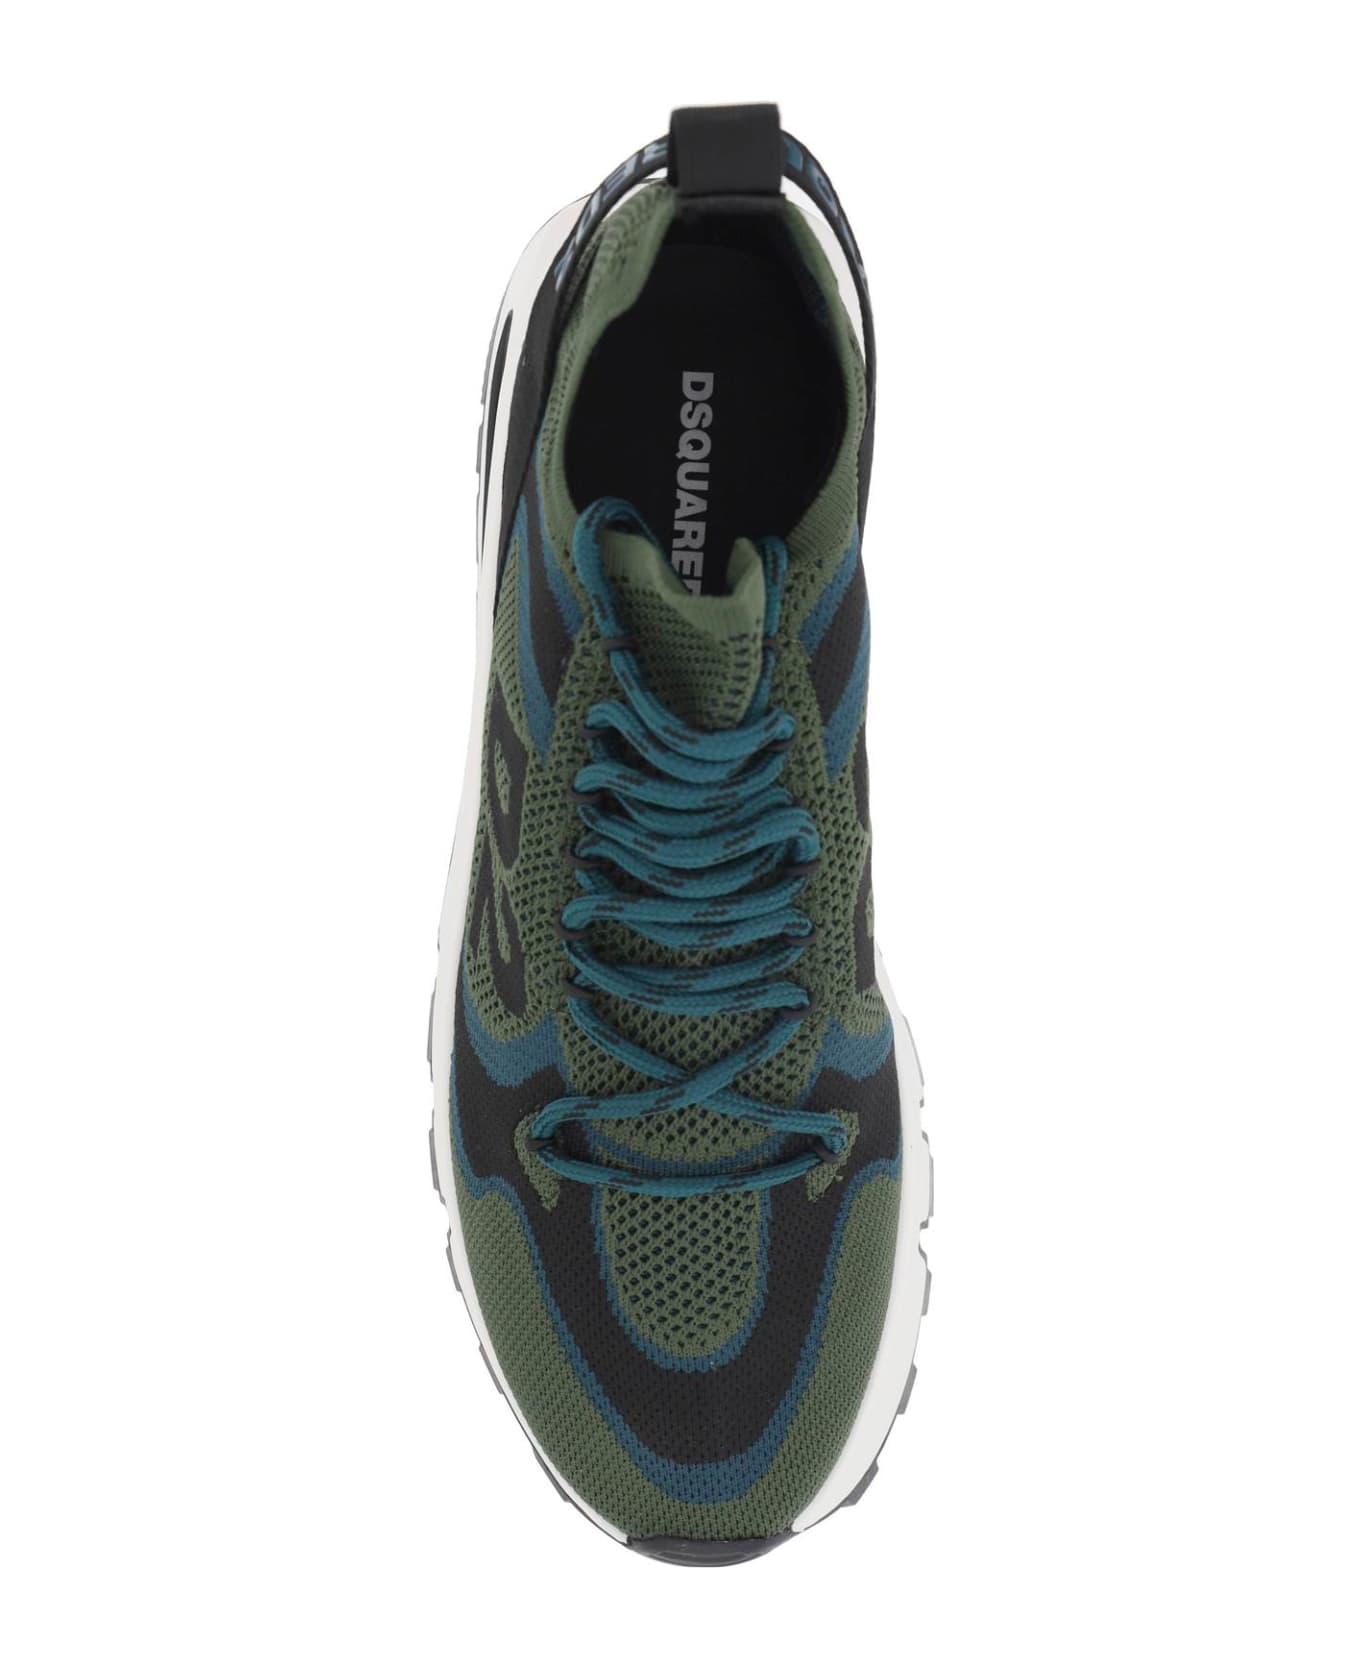 Dsquared2 Run Ds2 Sneakers - MILITARY TEAL BLACK (Black)